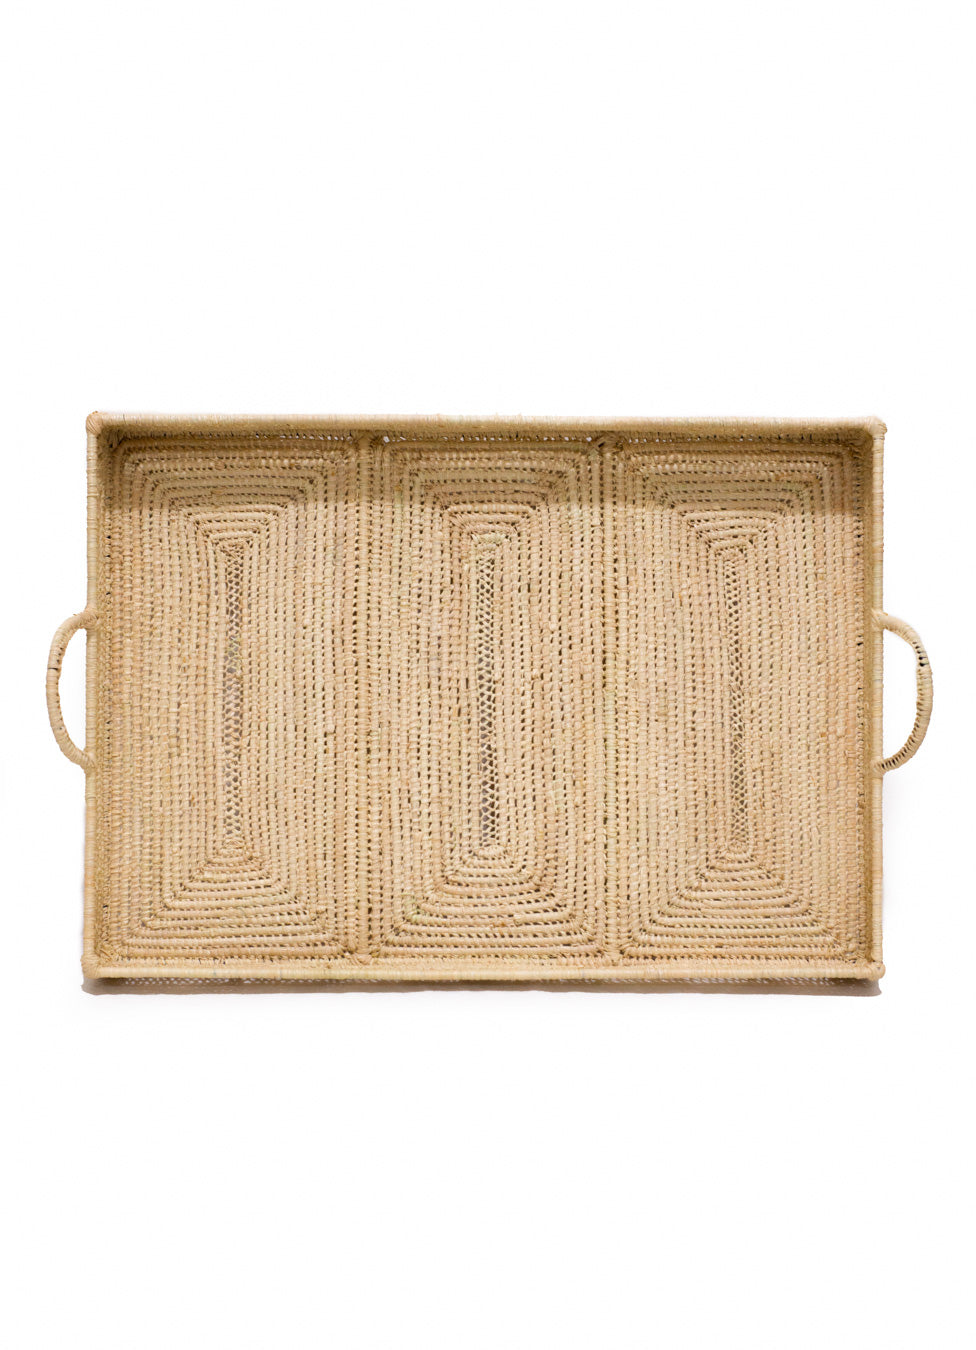 Large Handcrafted Raffia Serving Tray